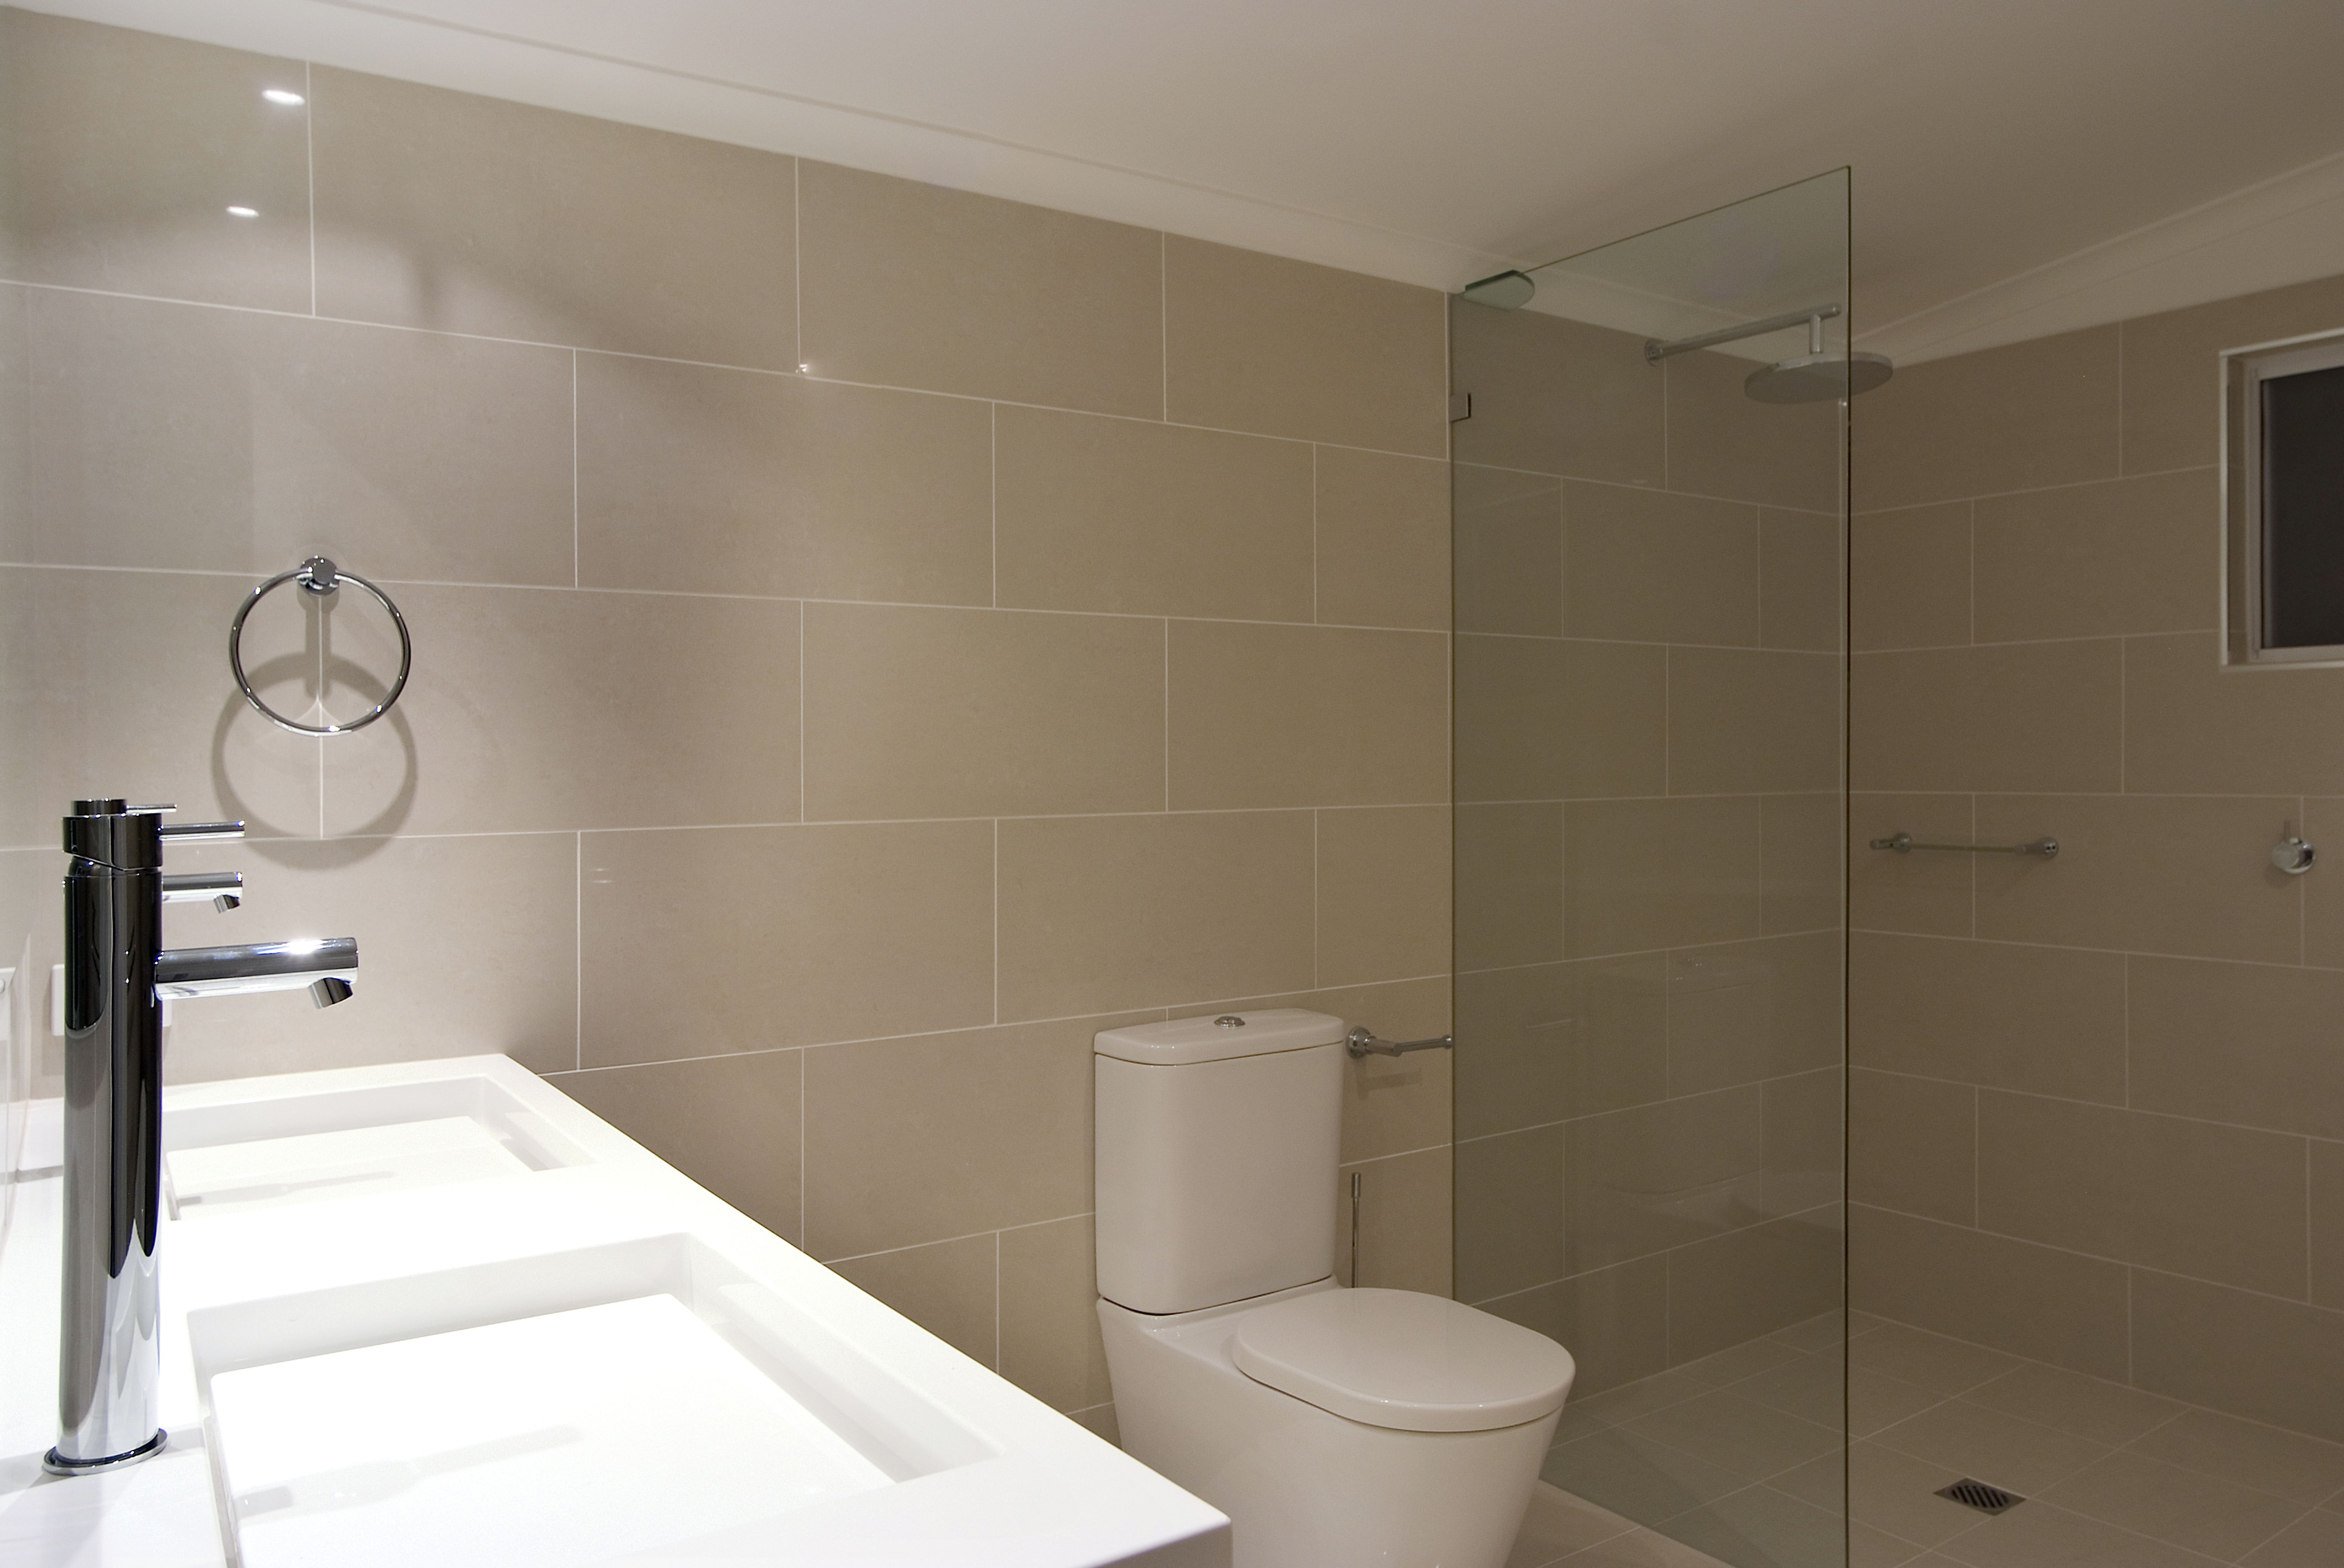 Clayfield main bathroom close up vanity, toilet suite, frameless glass panel